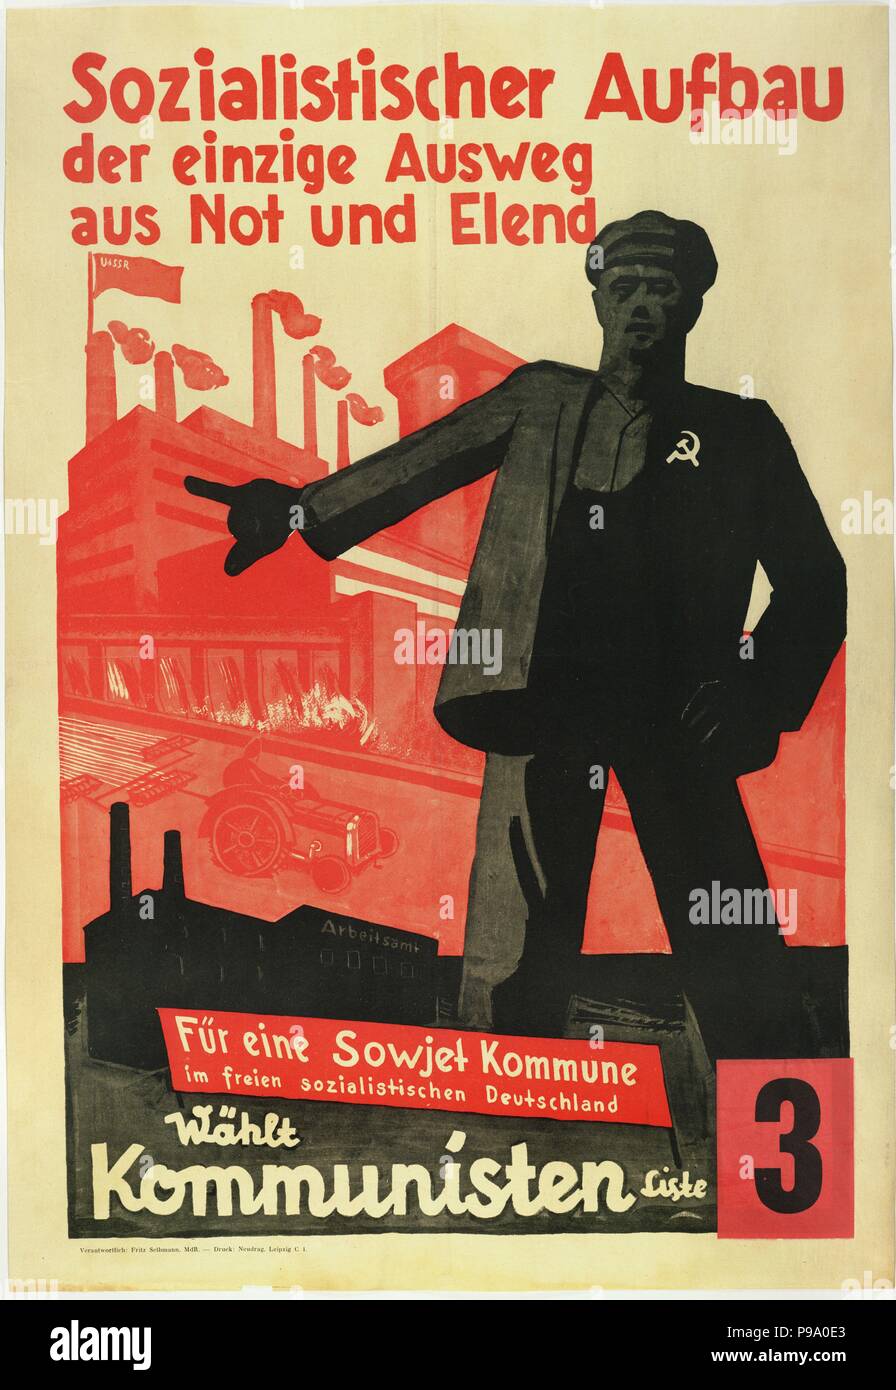 Socialist Buildup, the only way out of poverty and hardships. For a Soviet Commune in a free socialist Germany!. Museum: PRIVATE COLLECTION. Stock Photo